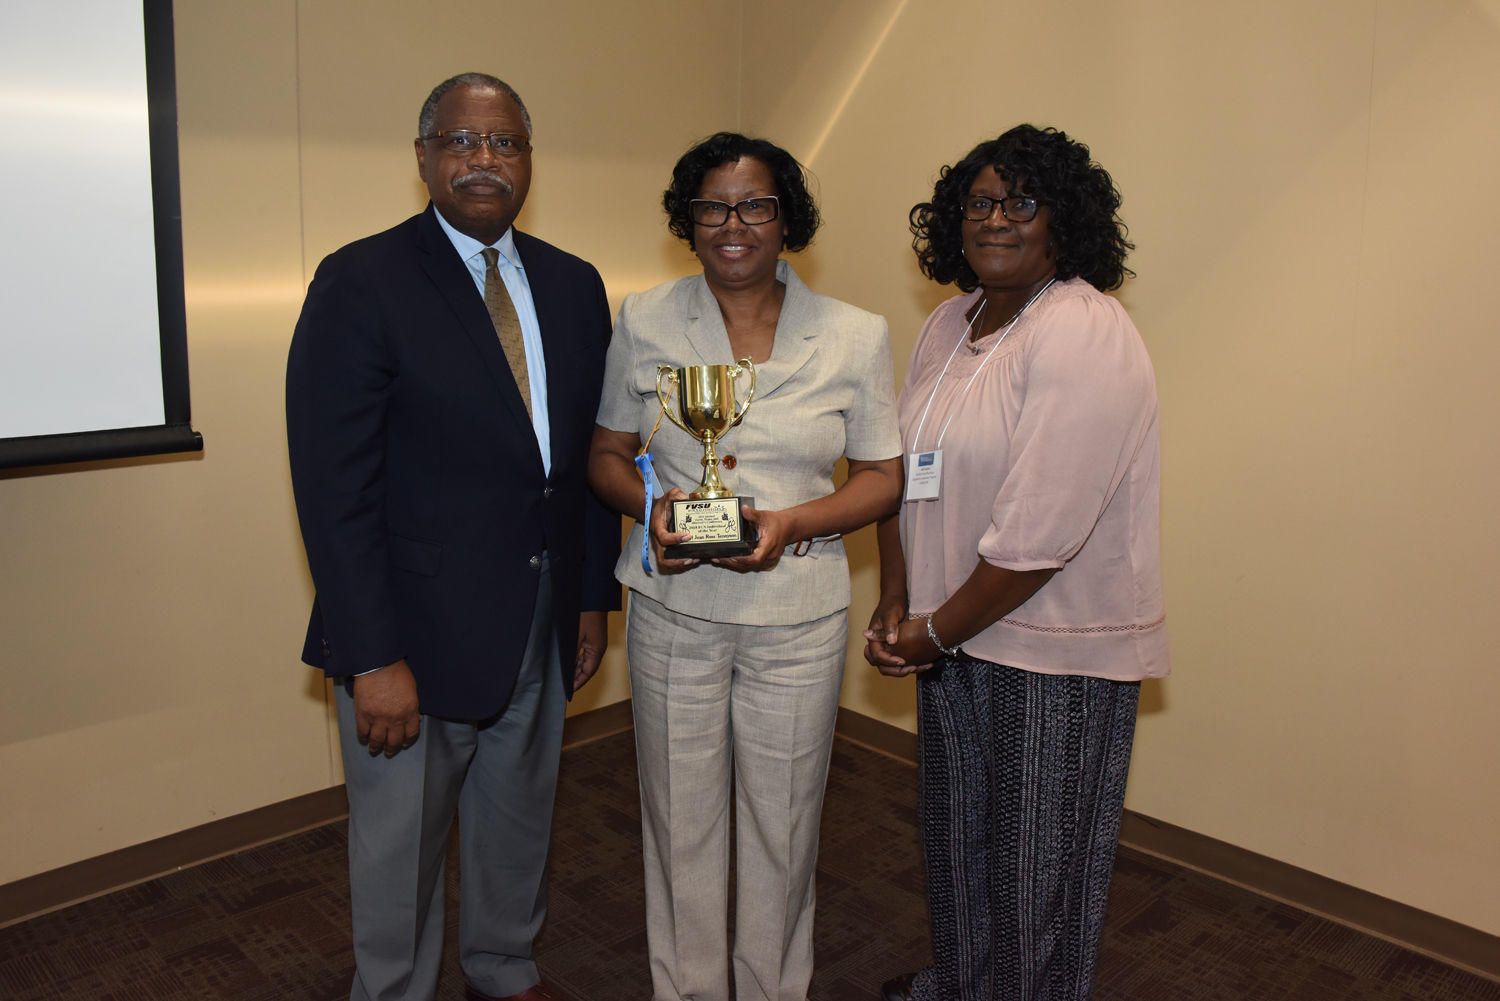 Sheryl Tennyson (center) a counselor at Hunt Elementary School, received the 2018 Family Consumer Sciences award at the Farm, Home and Ministers Conference. Presenting the award to Tennyson is Dr. Mark Latimore, FVSU extension administrator (left), and Ga